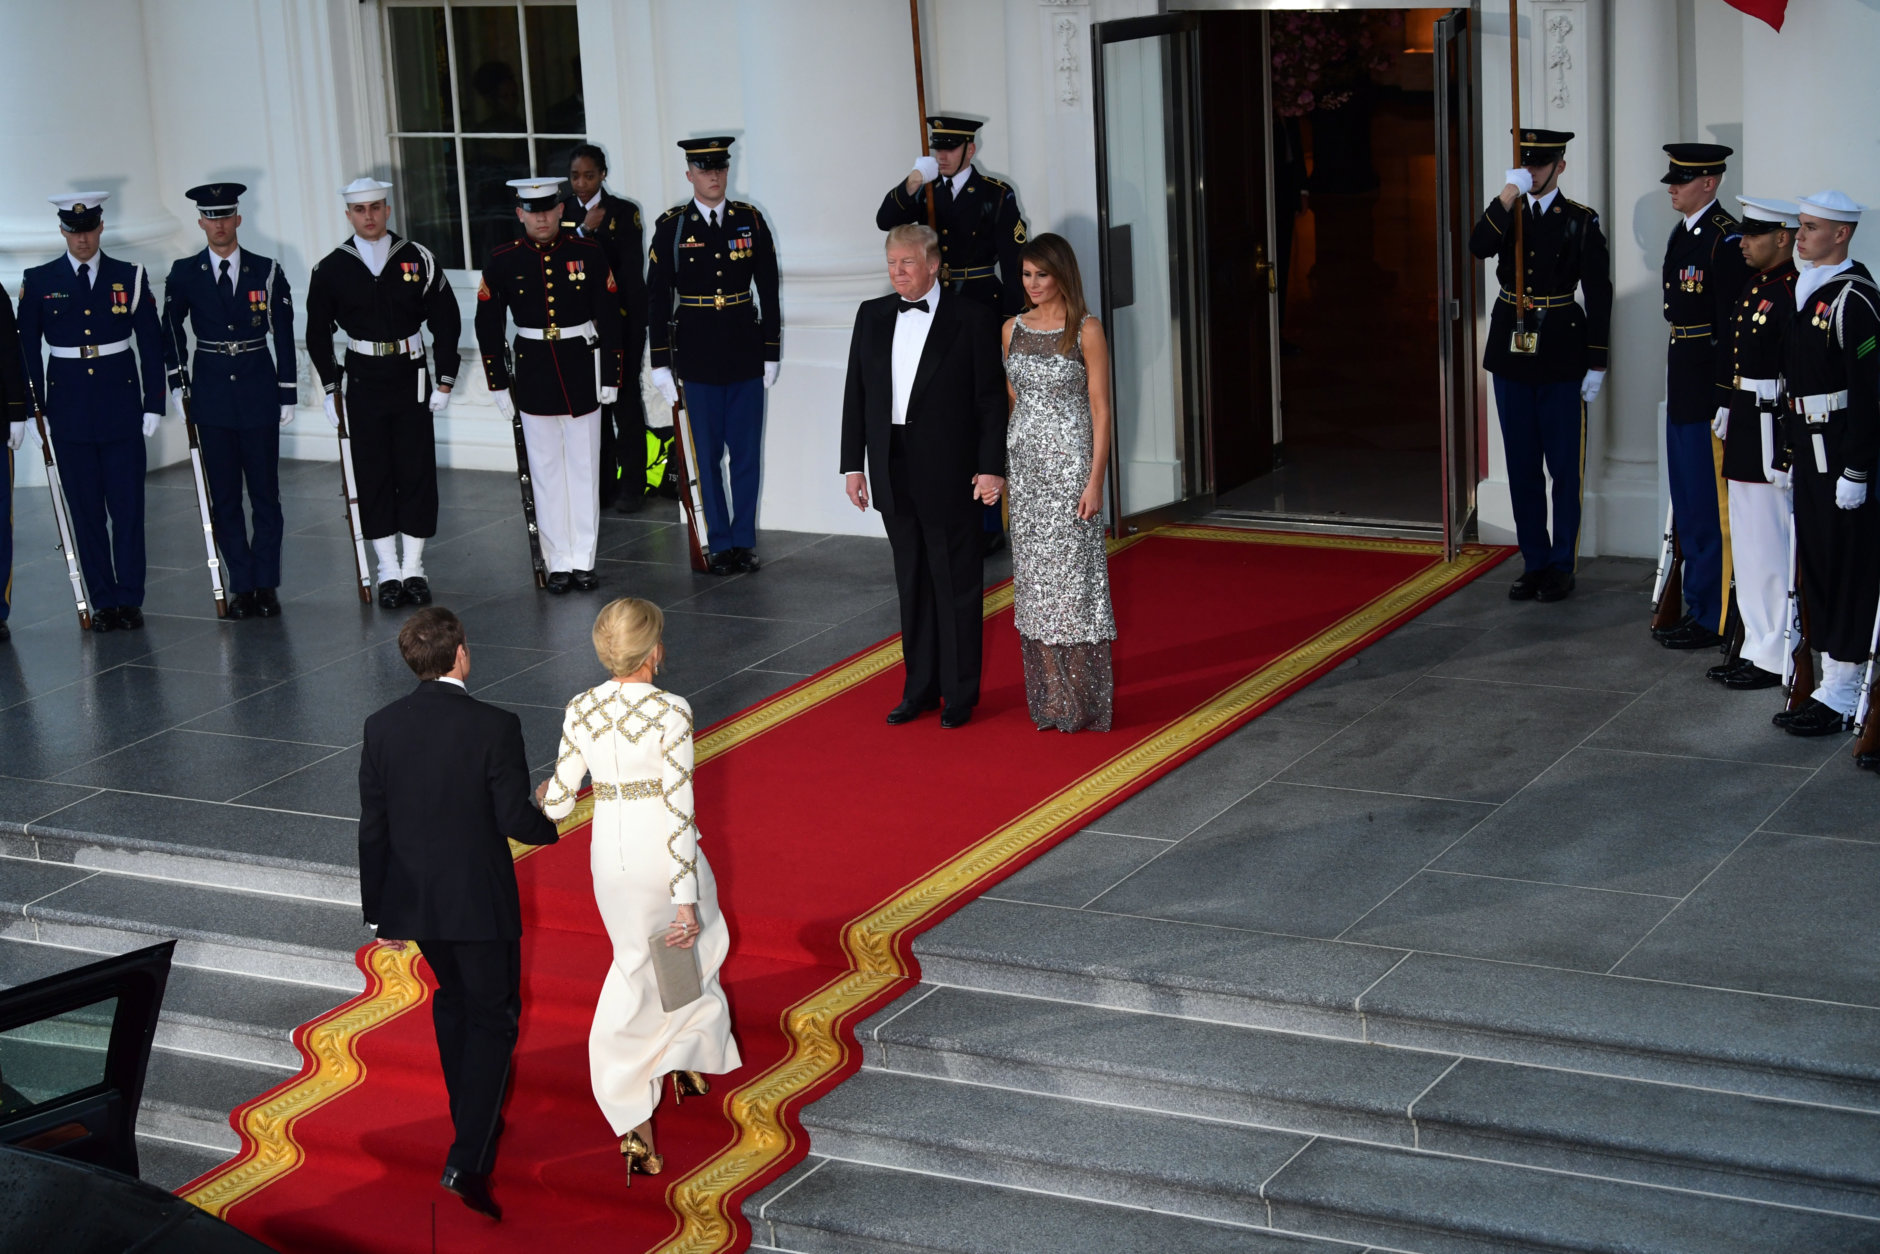 President Donald Trump and first lady Melania Trump wait to greet French President Emmanuel Macron and his wife Brigitte Macron as they arrive for a State Dinner at the White House in Washington, Tuesday, April 24, 2018. (AP Photo/Susan Walsh)